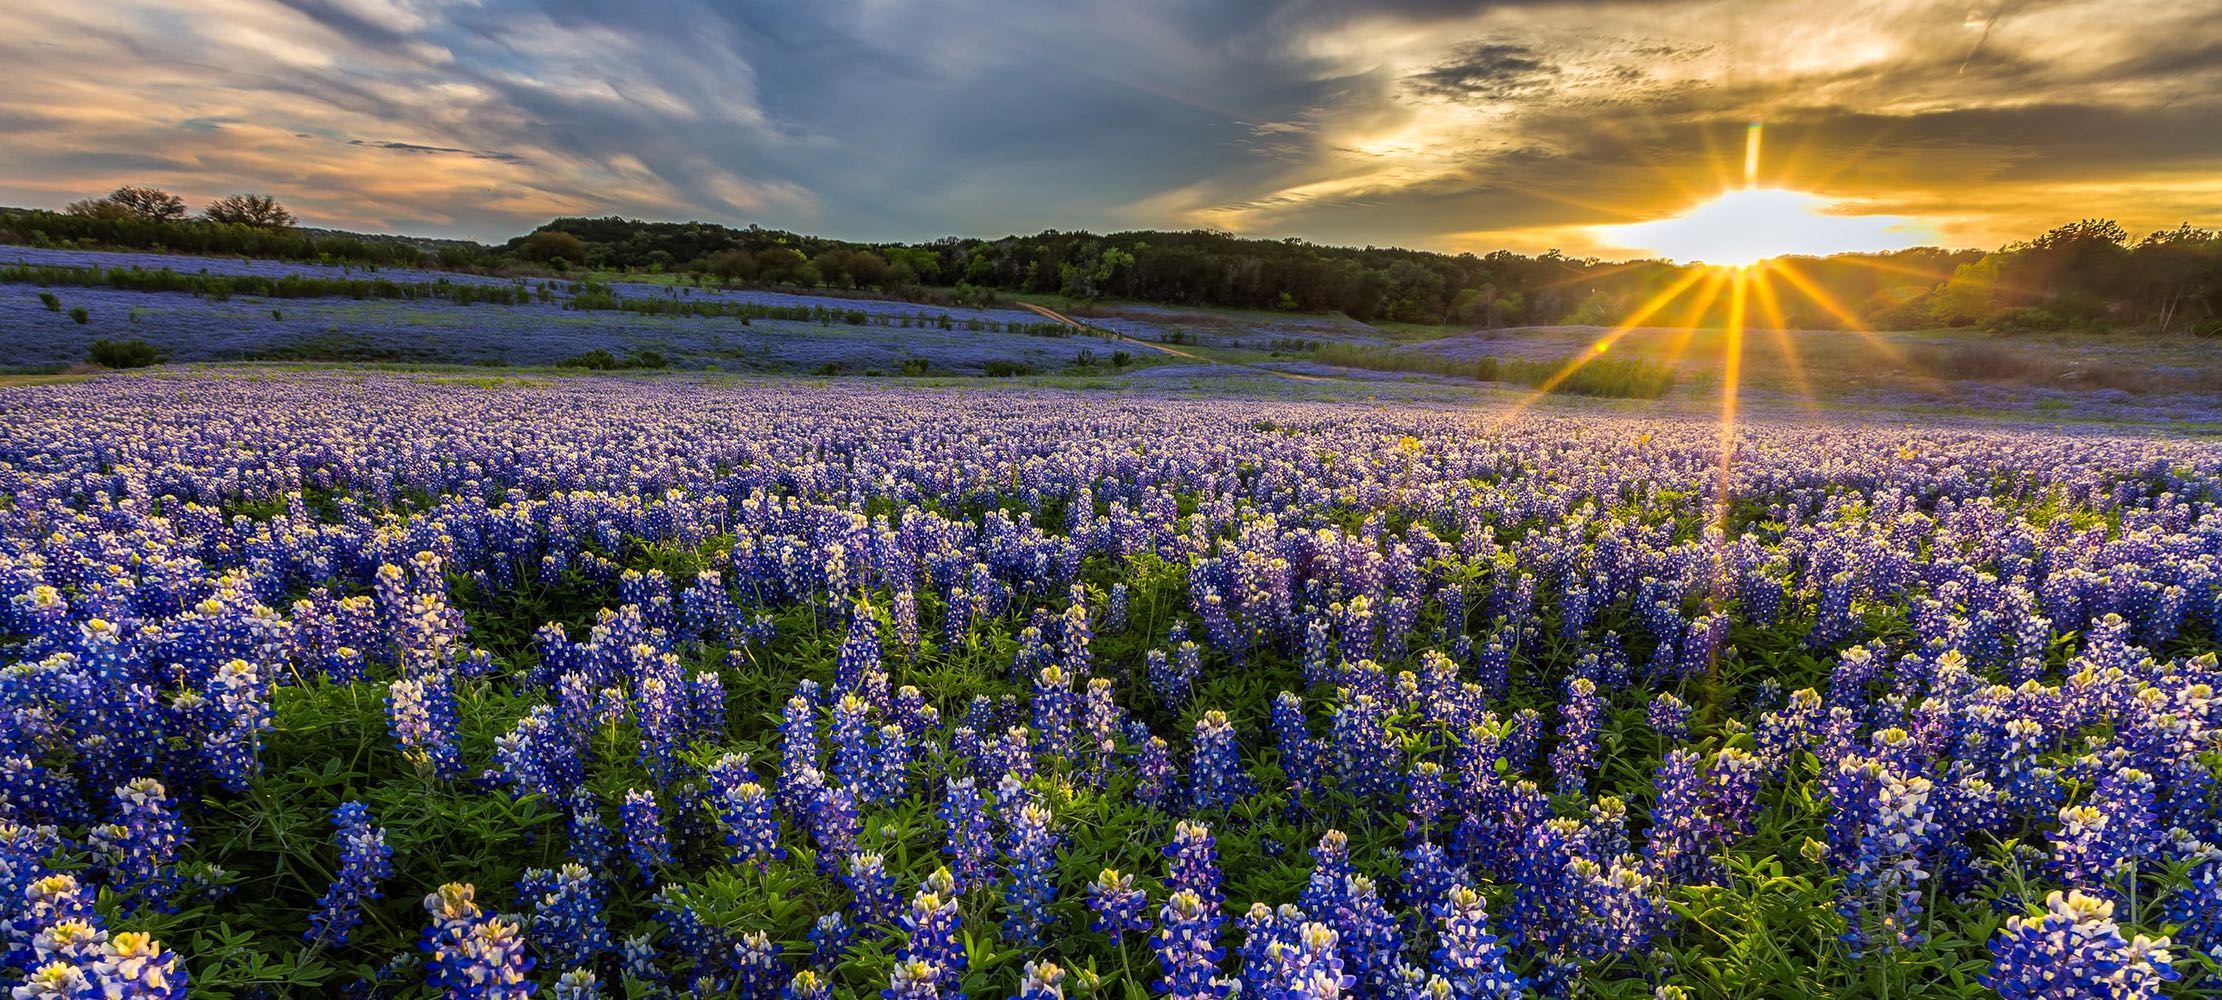 Field of Blue Bonnets at Sunset